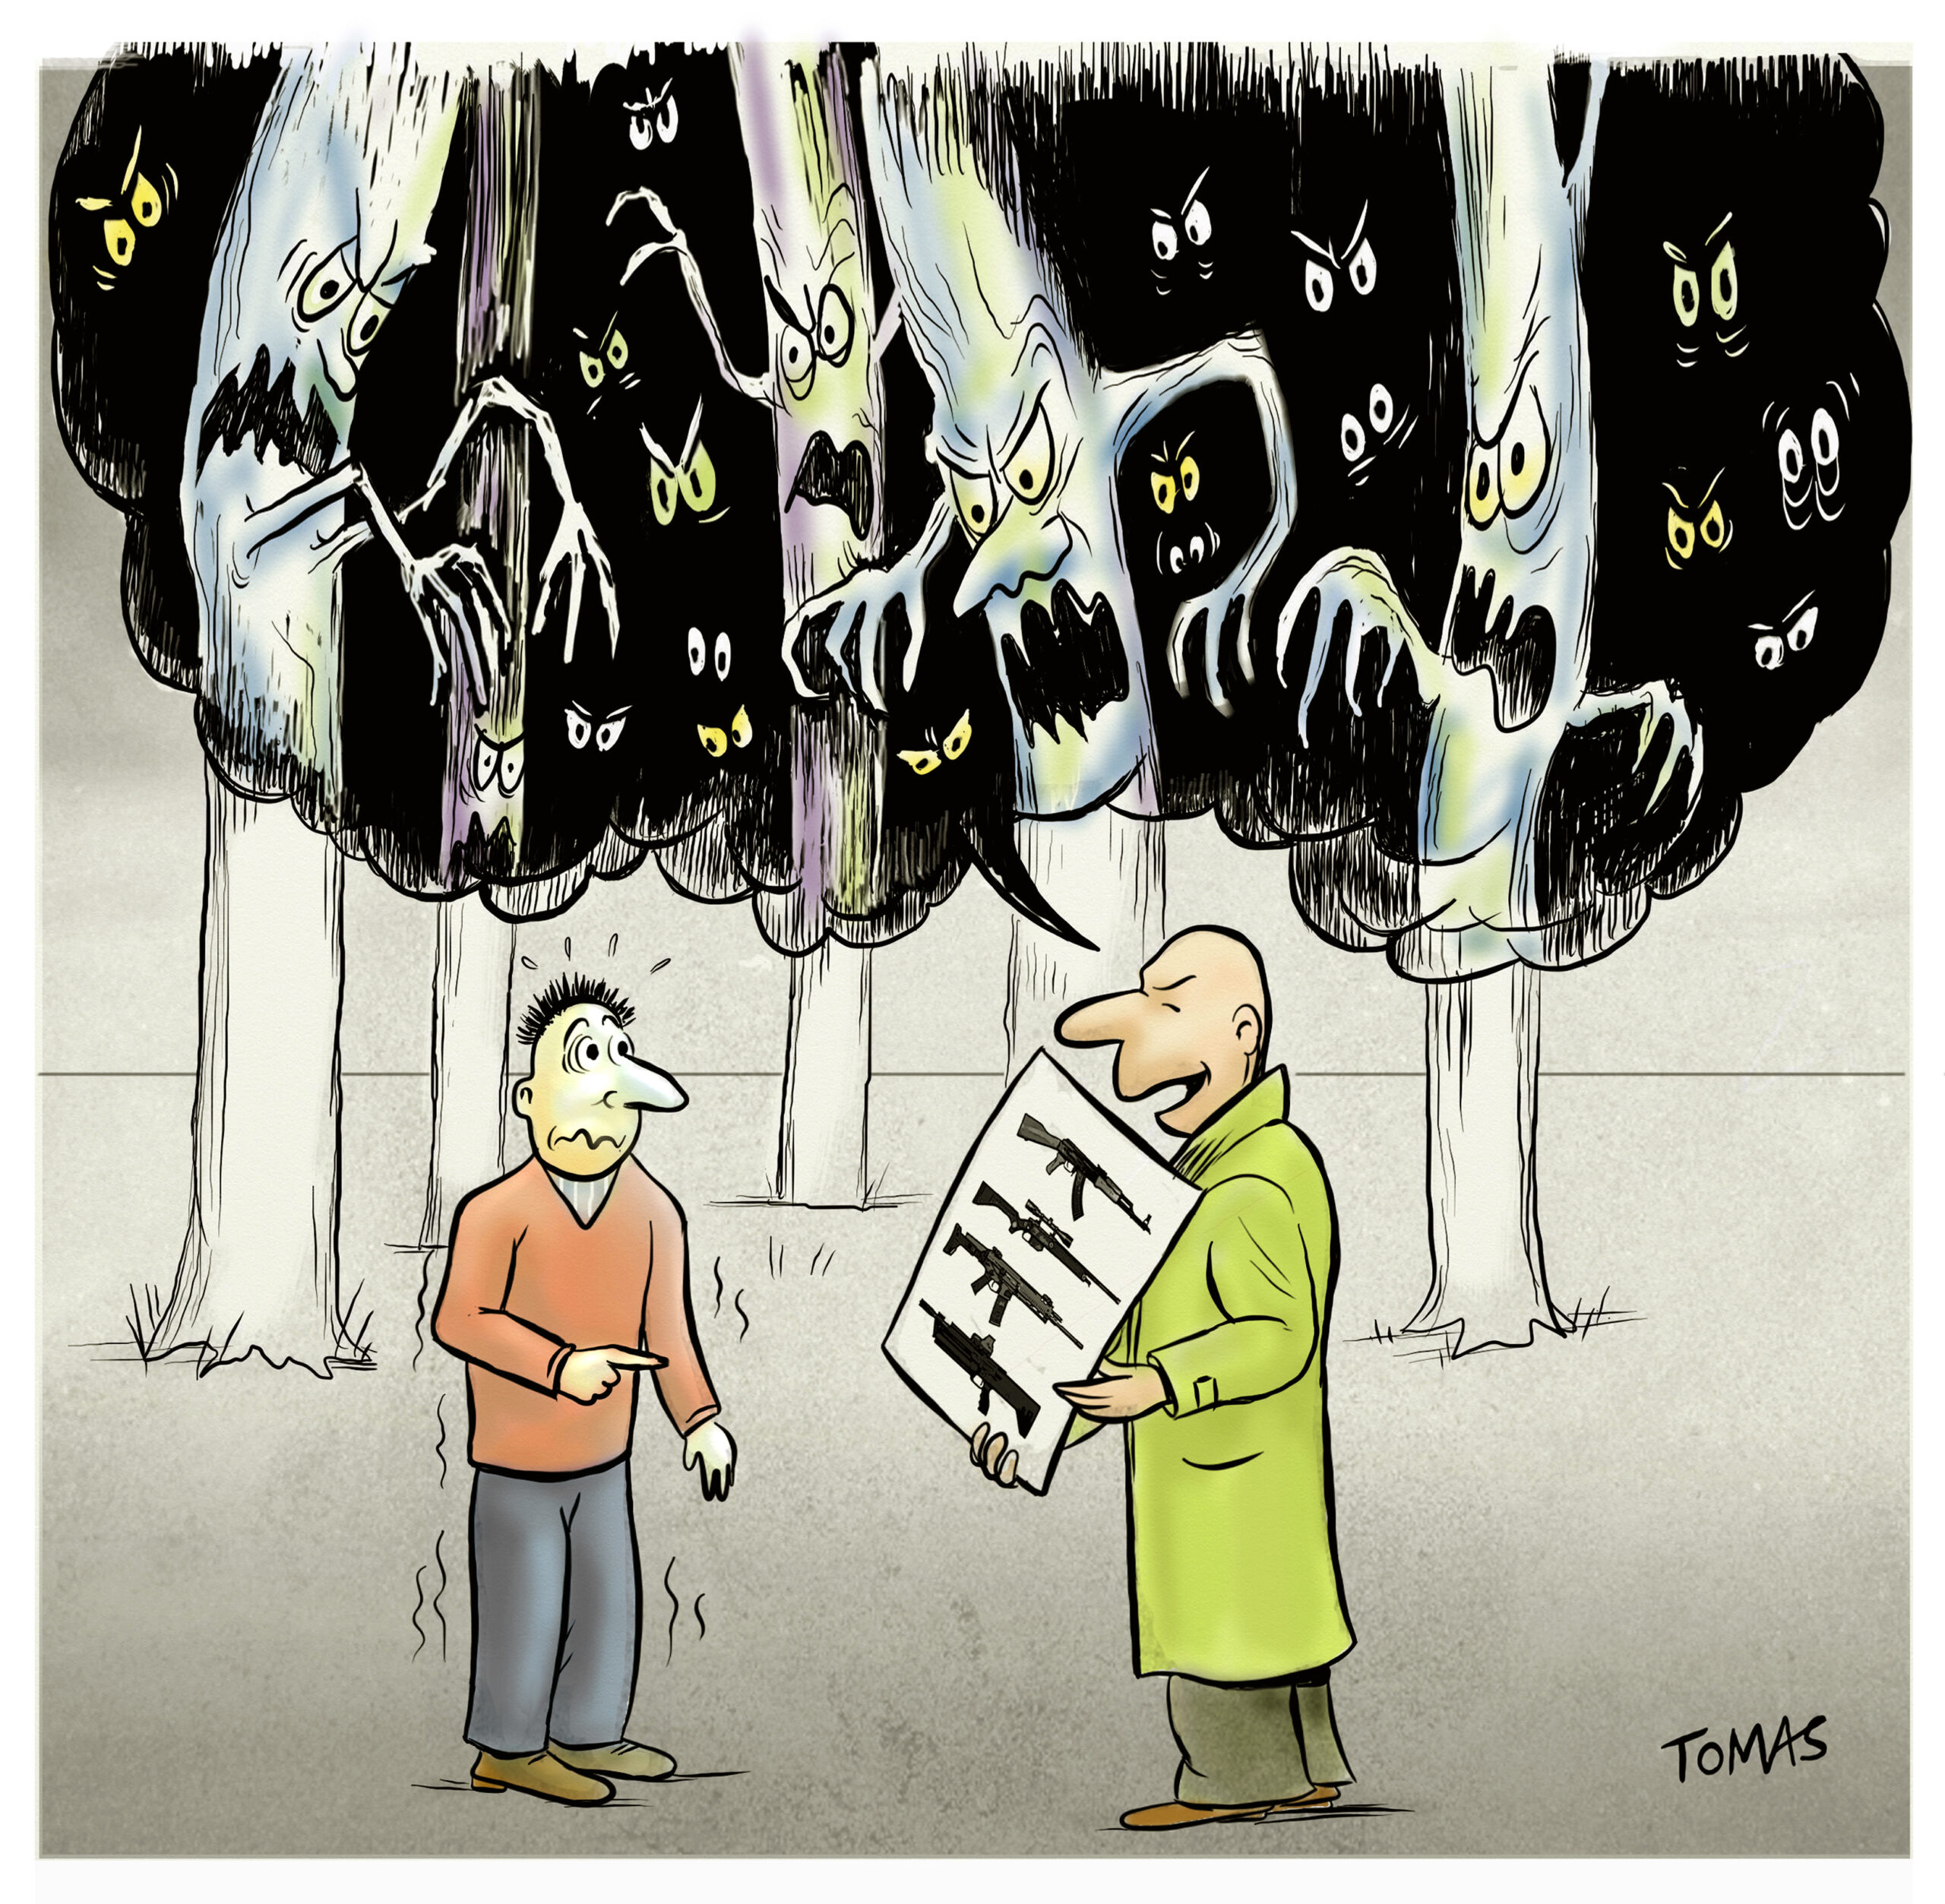 Colorful sketch of scary trees looming behind two men, one showing the other a chart of weapons.